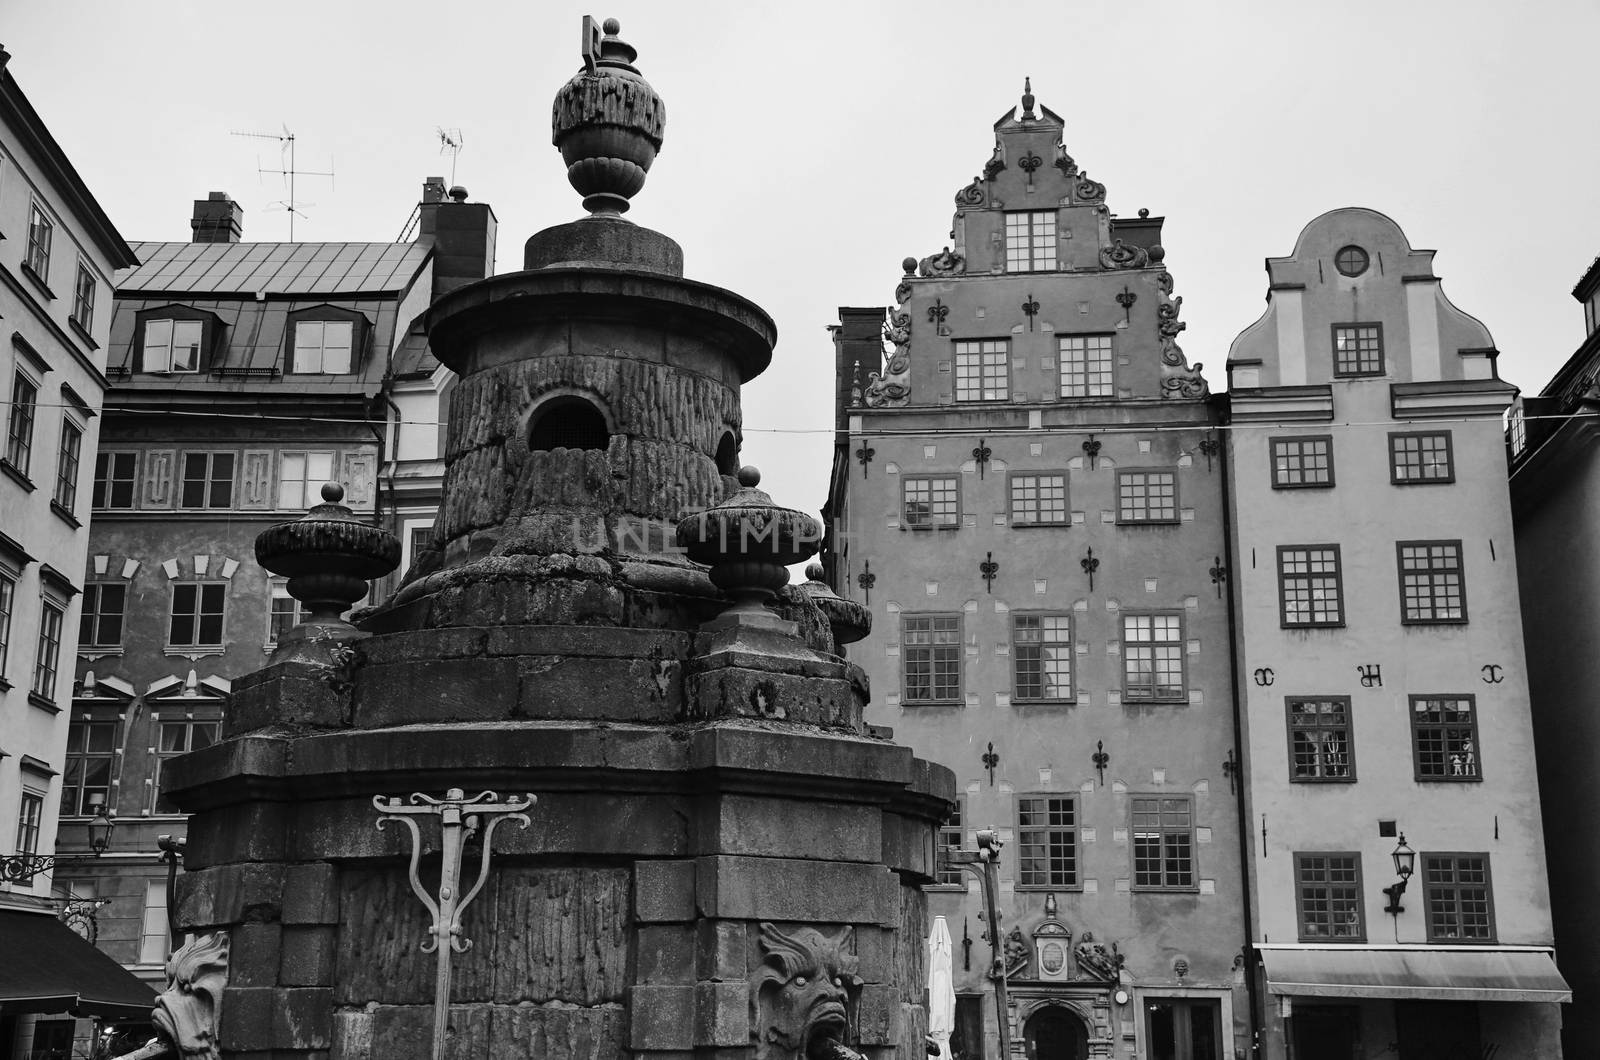 Statue with water outlets at Stortorget, Stockholm, Sweden by vladacanon